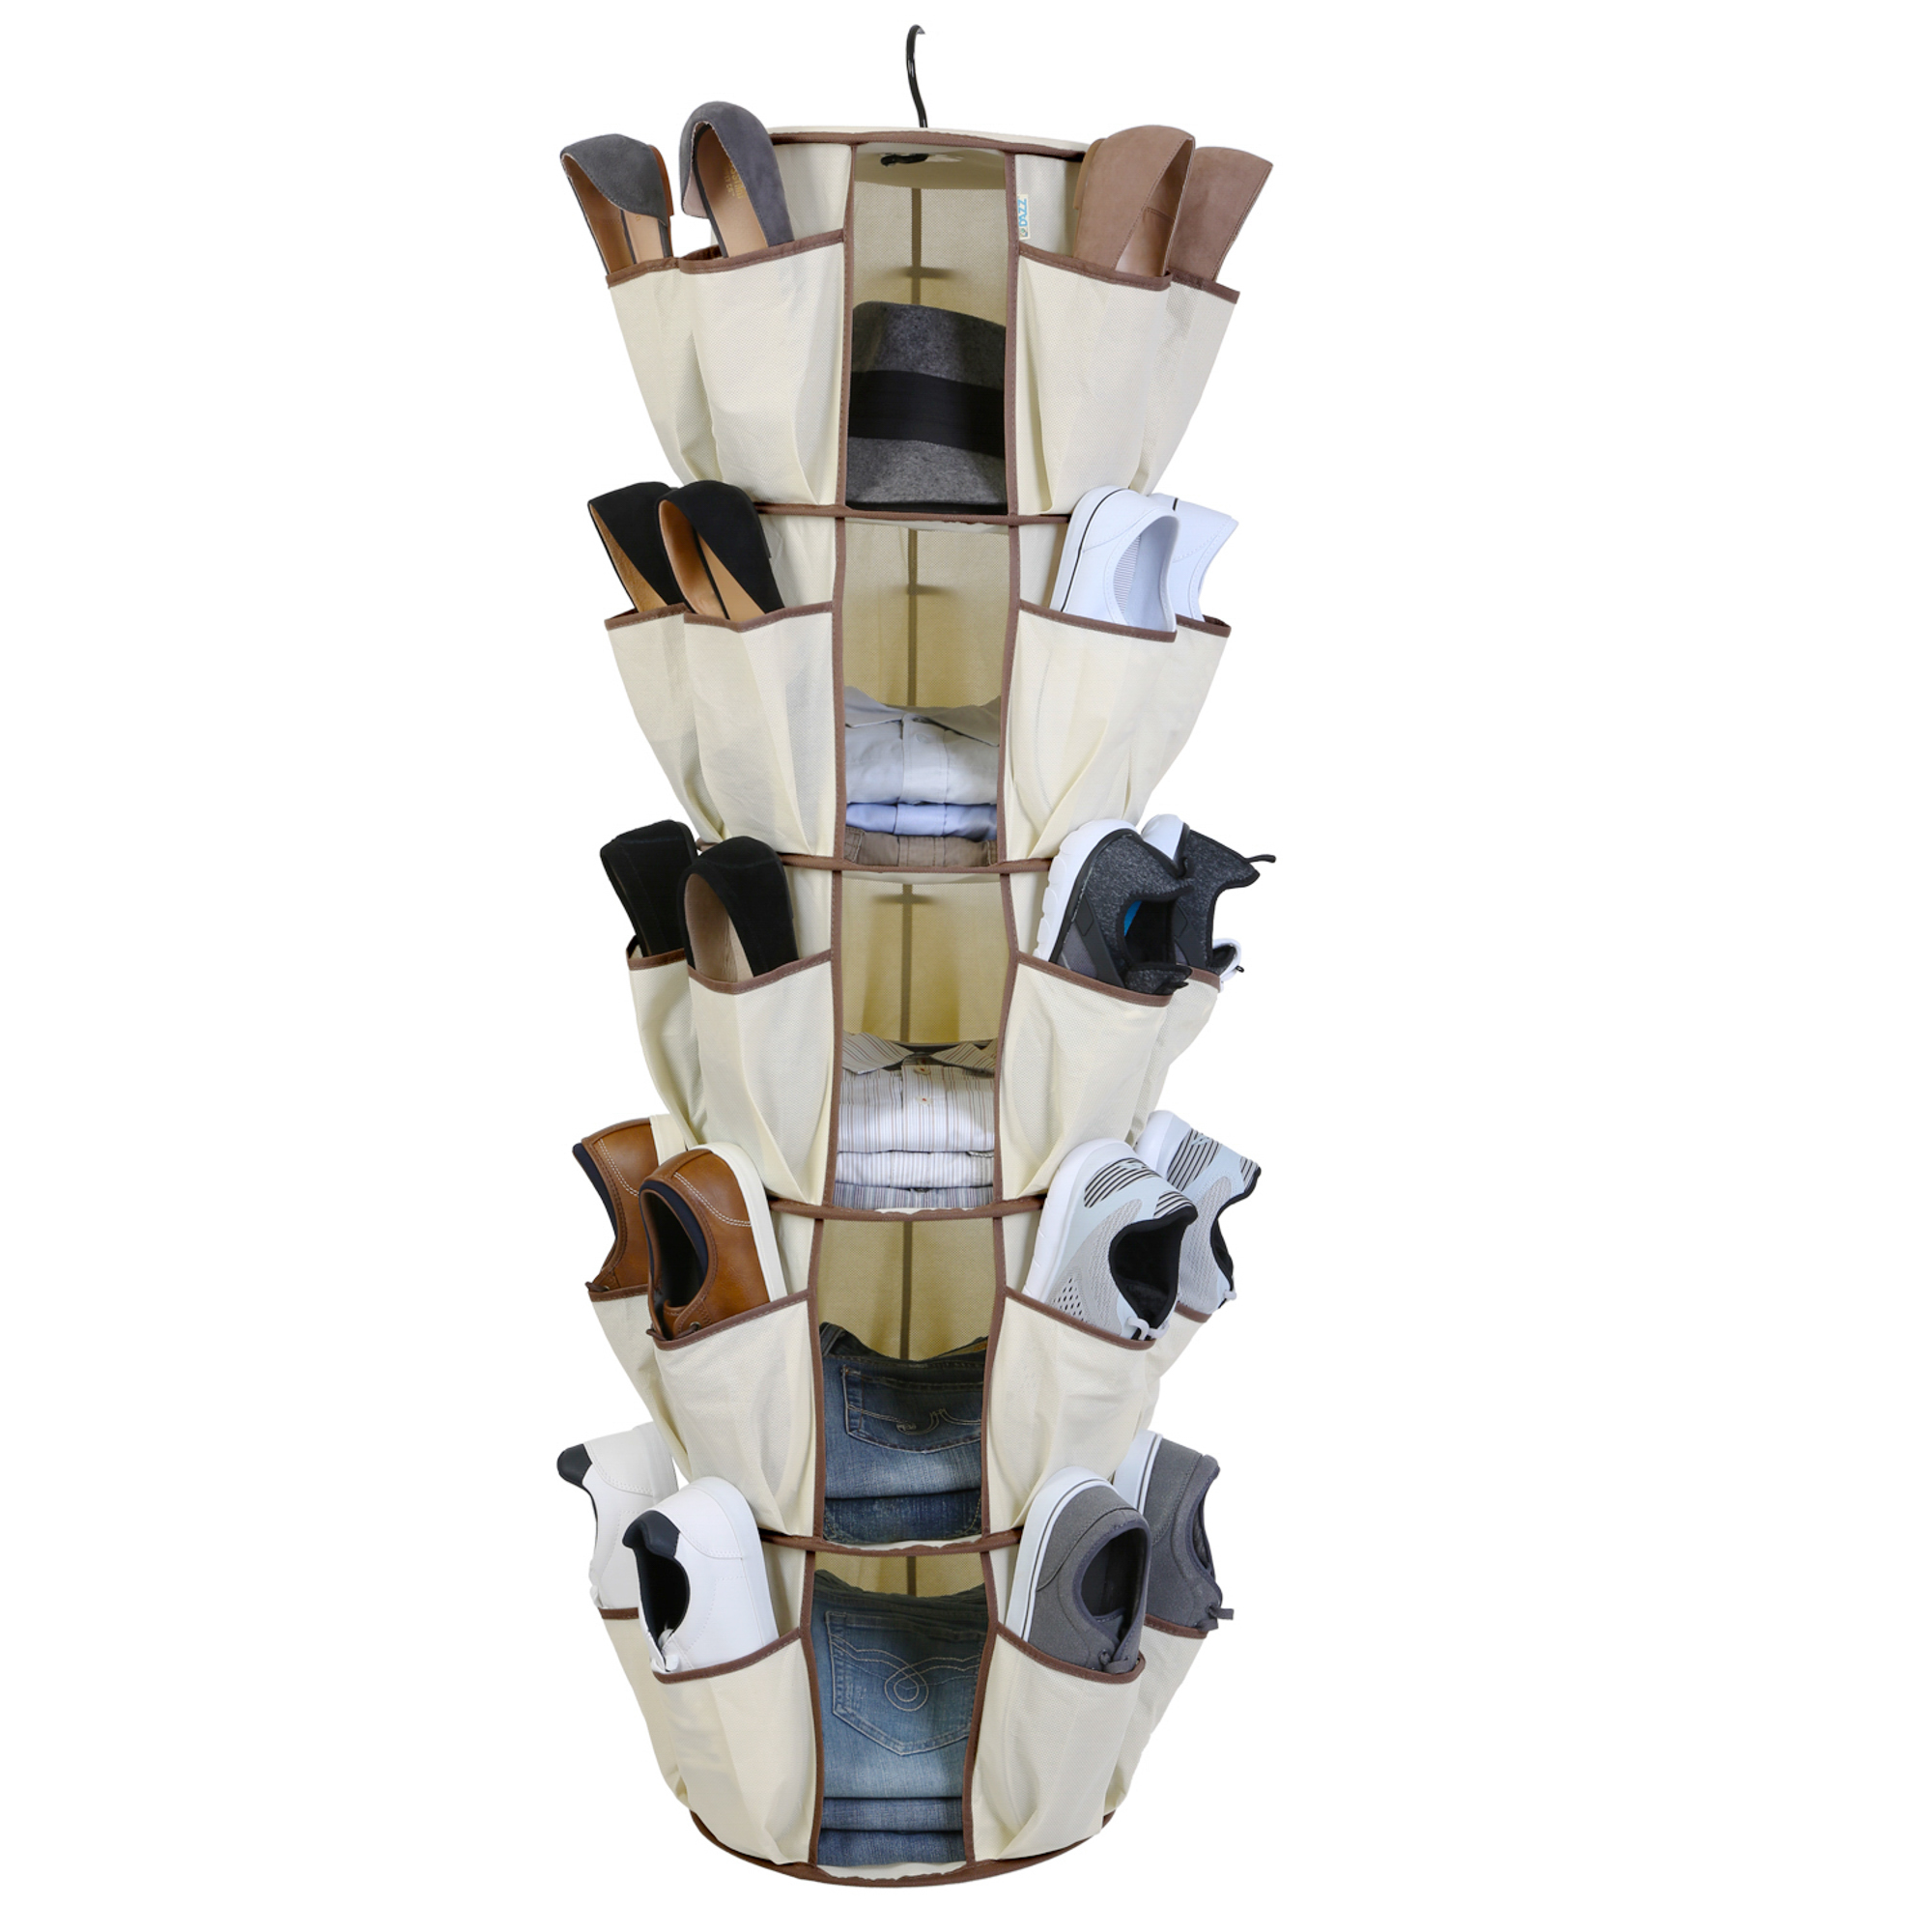 Smart Design 5-Tier Hanging Carousel Organizer with 40 Pockets and Steel Metal Hook - 13 x 51.8 inch - Beige - image 1 of 5